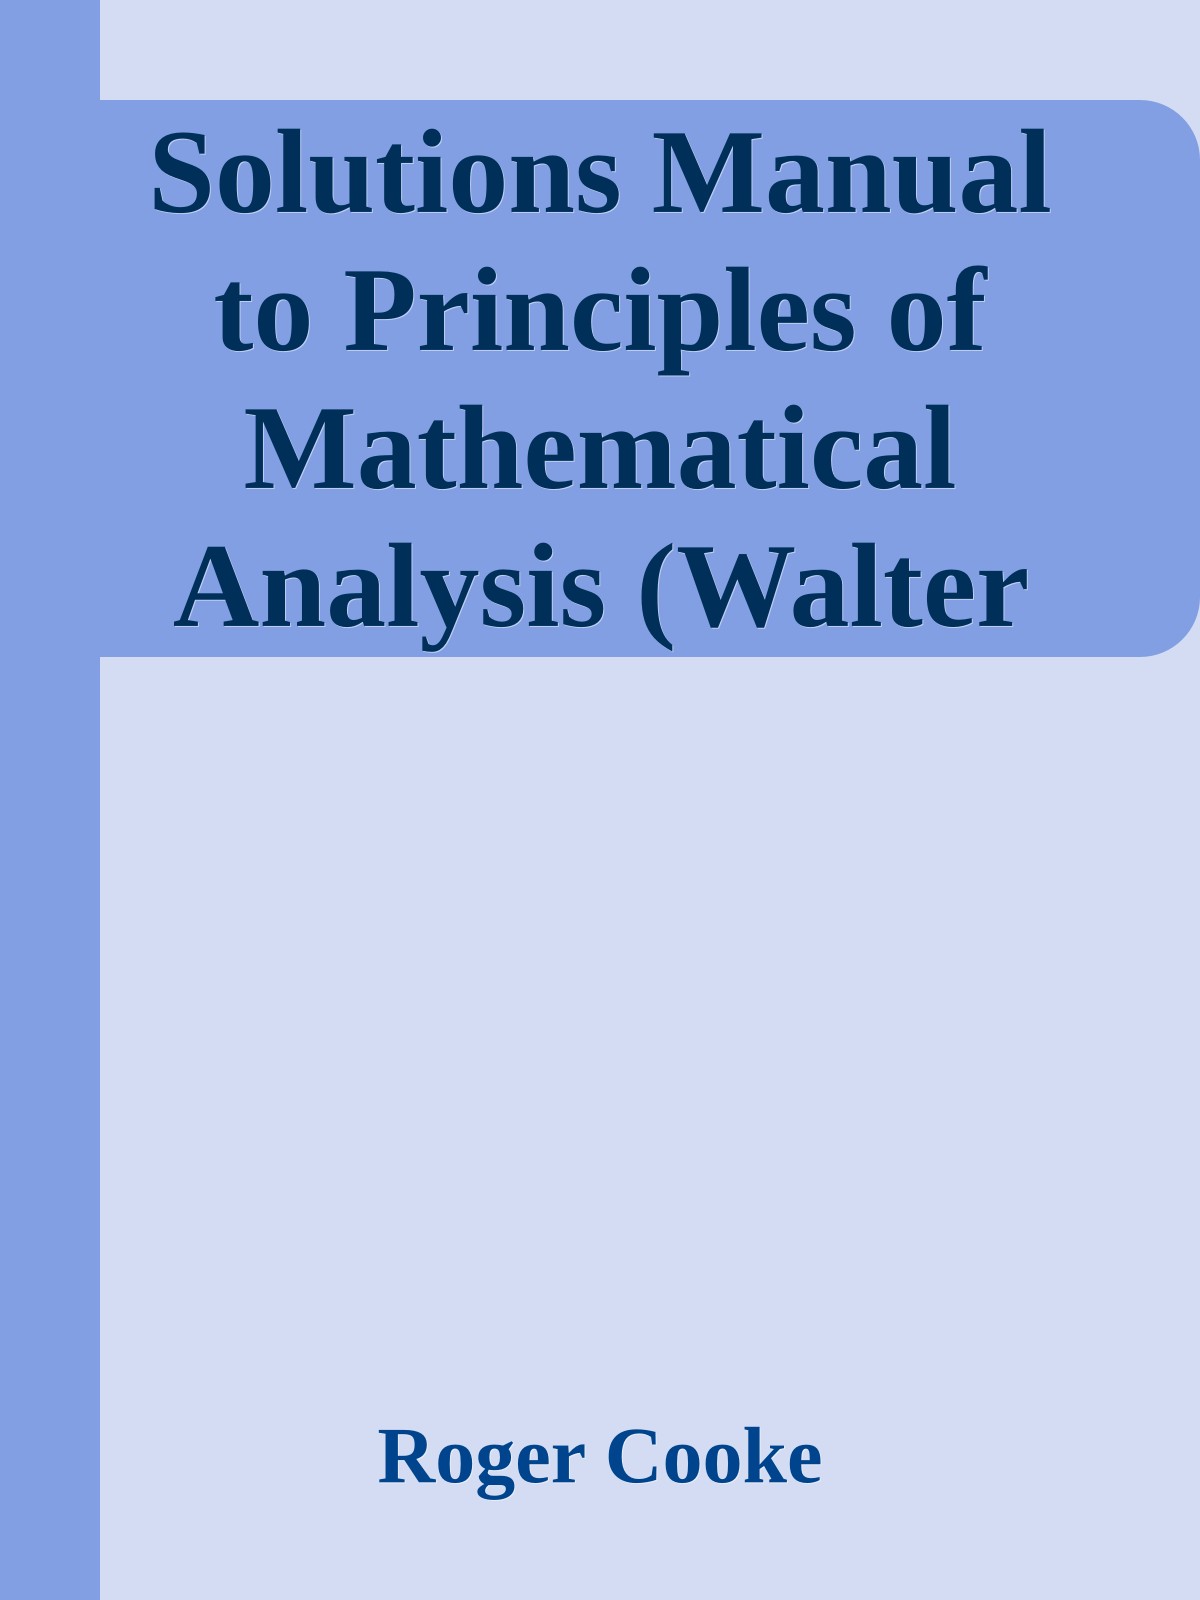 Solutions Manual to Principles of Mathematical Analysis (Walter Rudin)